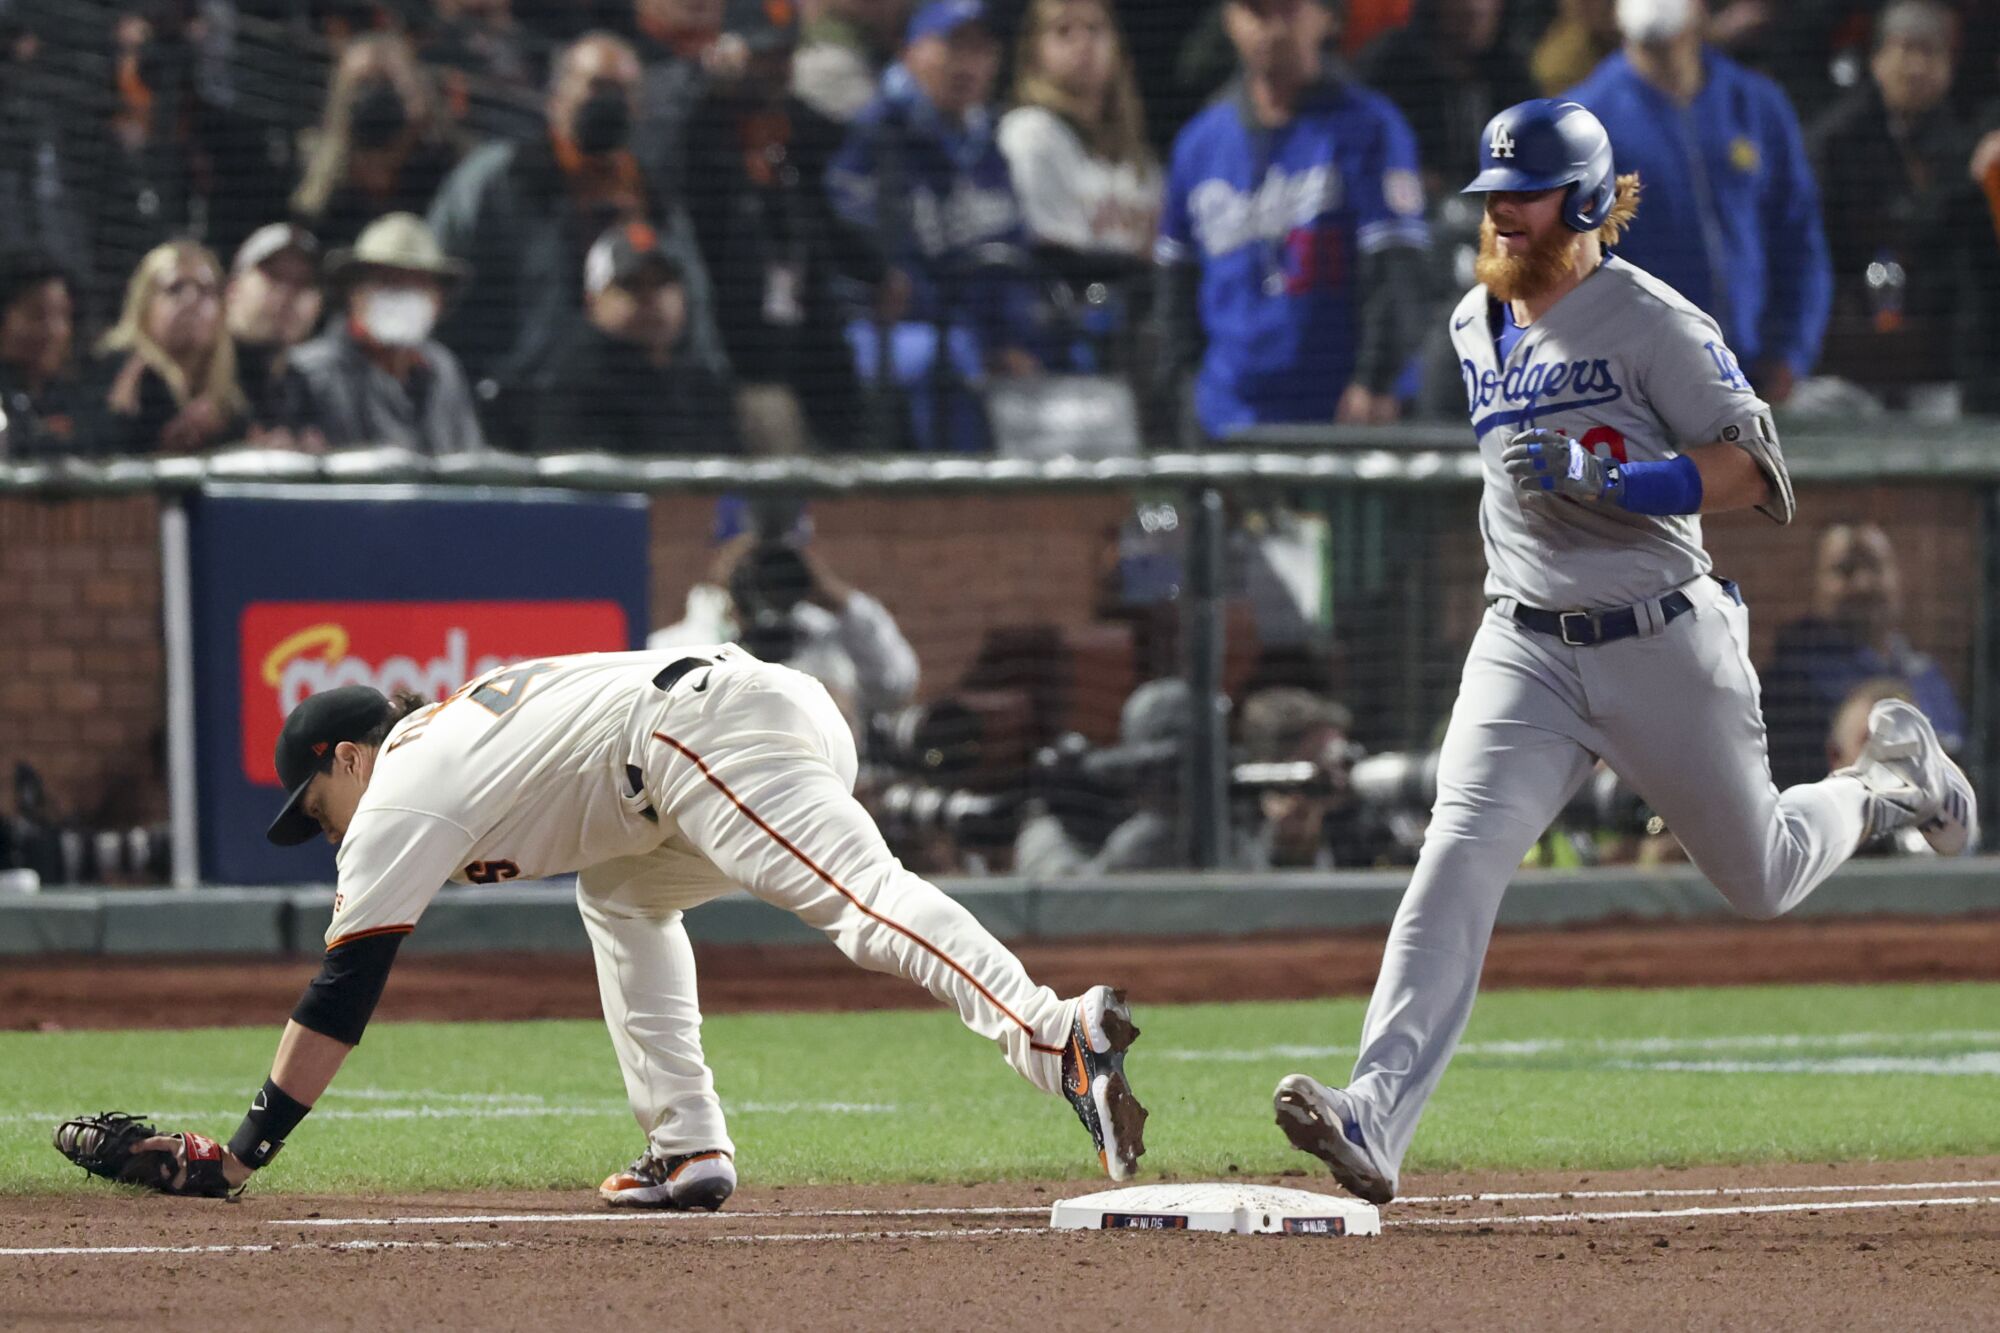 Giants first baseman Wilmer Flores, left, catches the ball to force out Dodgers' Justin Turner